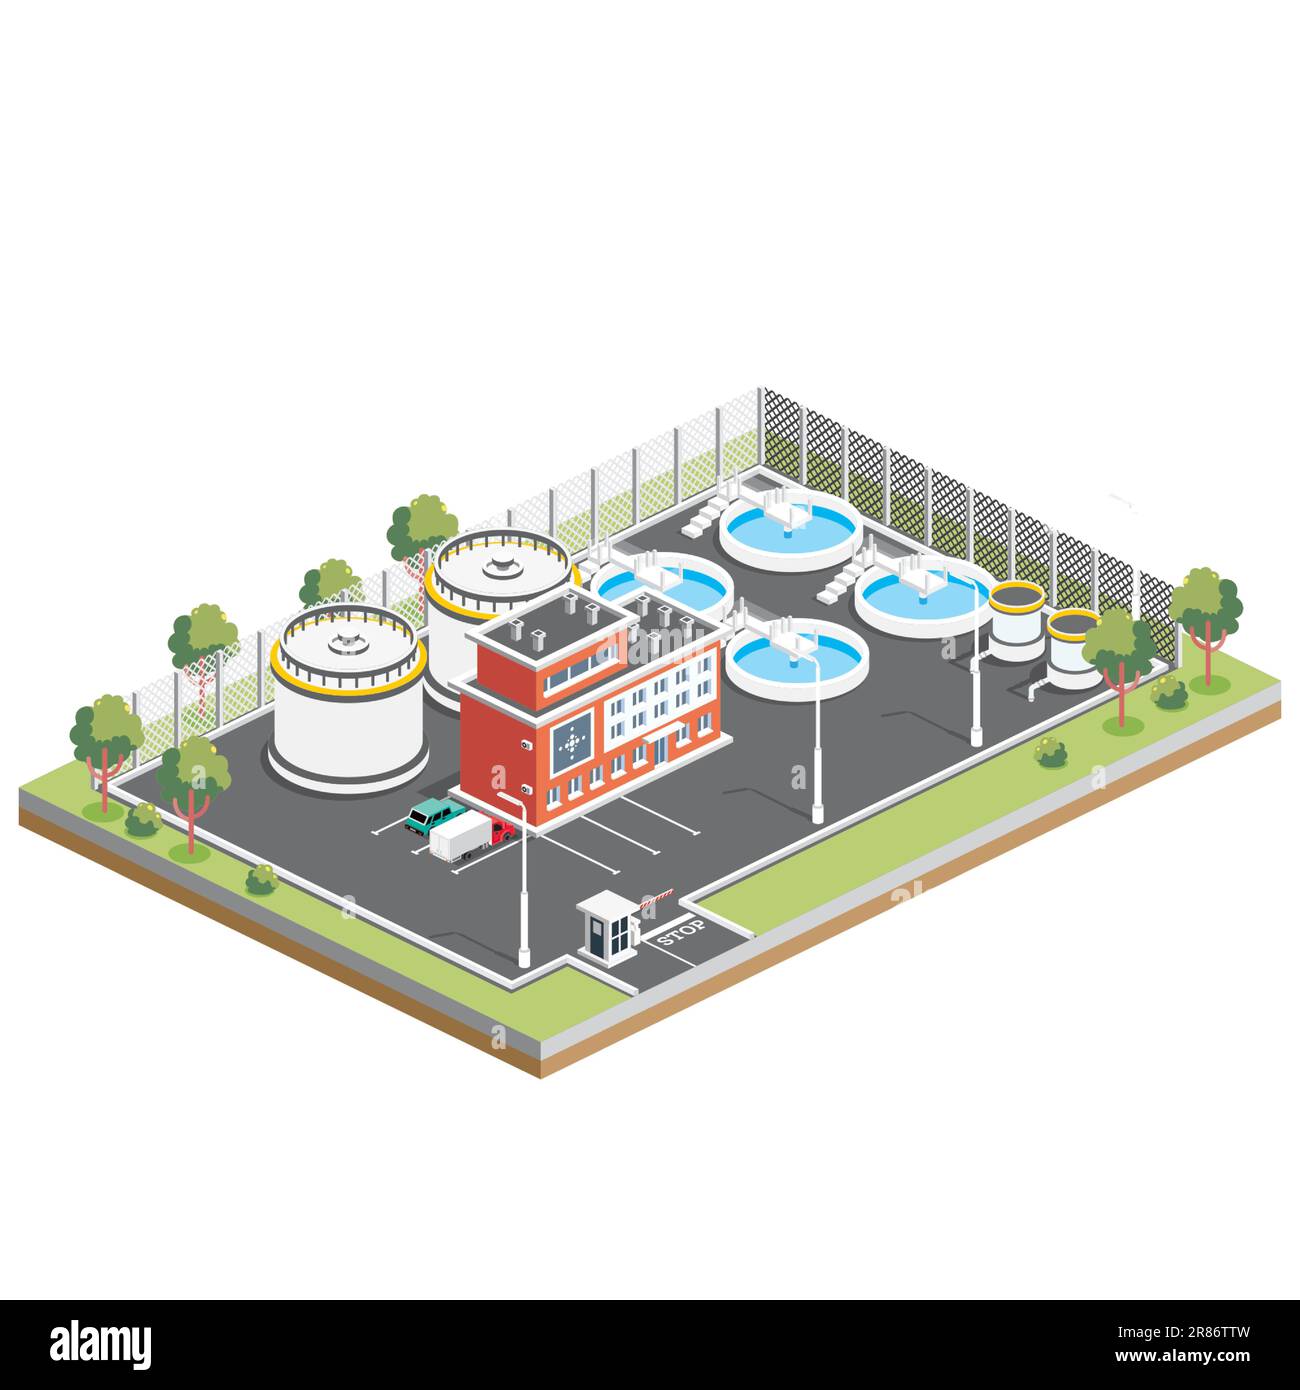 Isometric Wastewater Treatment Facility. Infographic Design Element Isolated on White Background. Vector Illustration. Ecology of Water Resources. Stock Vector